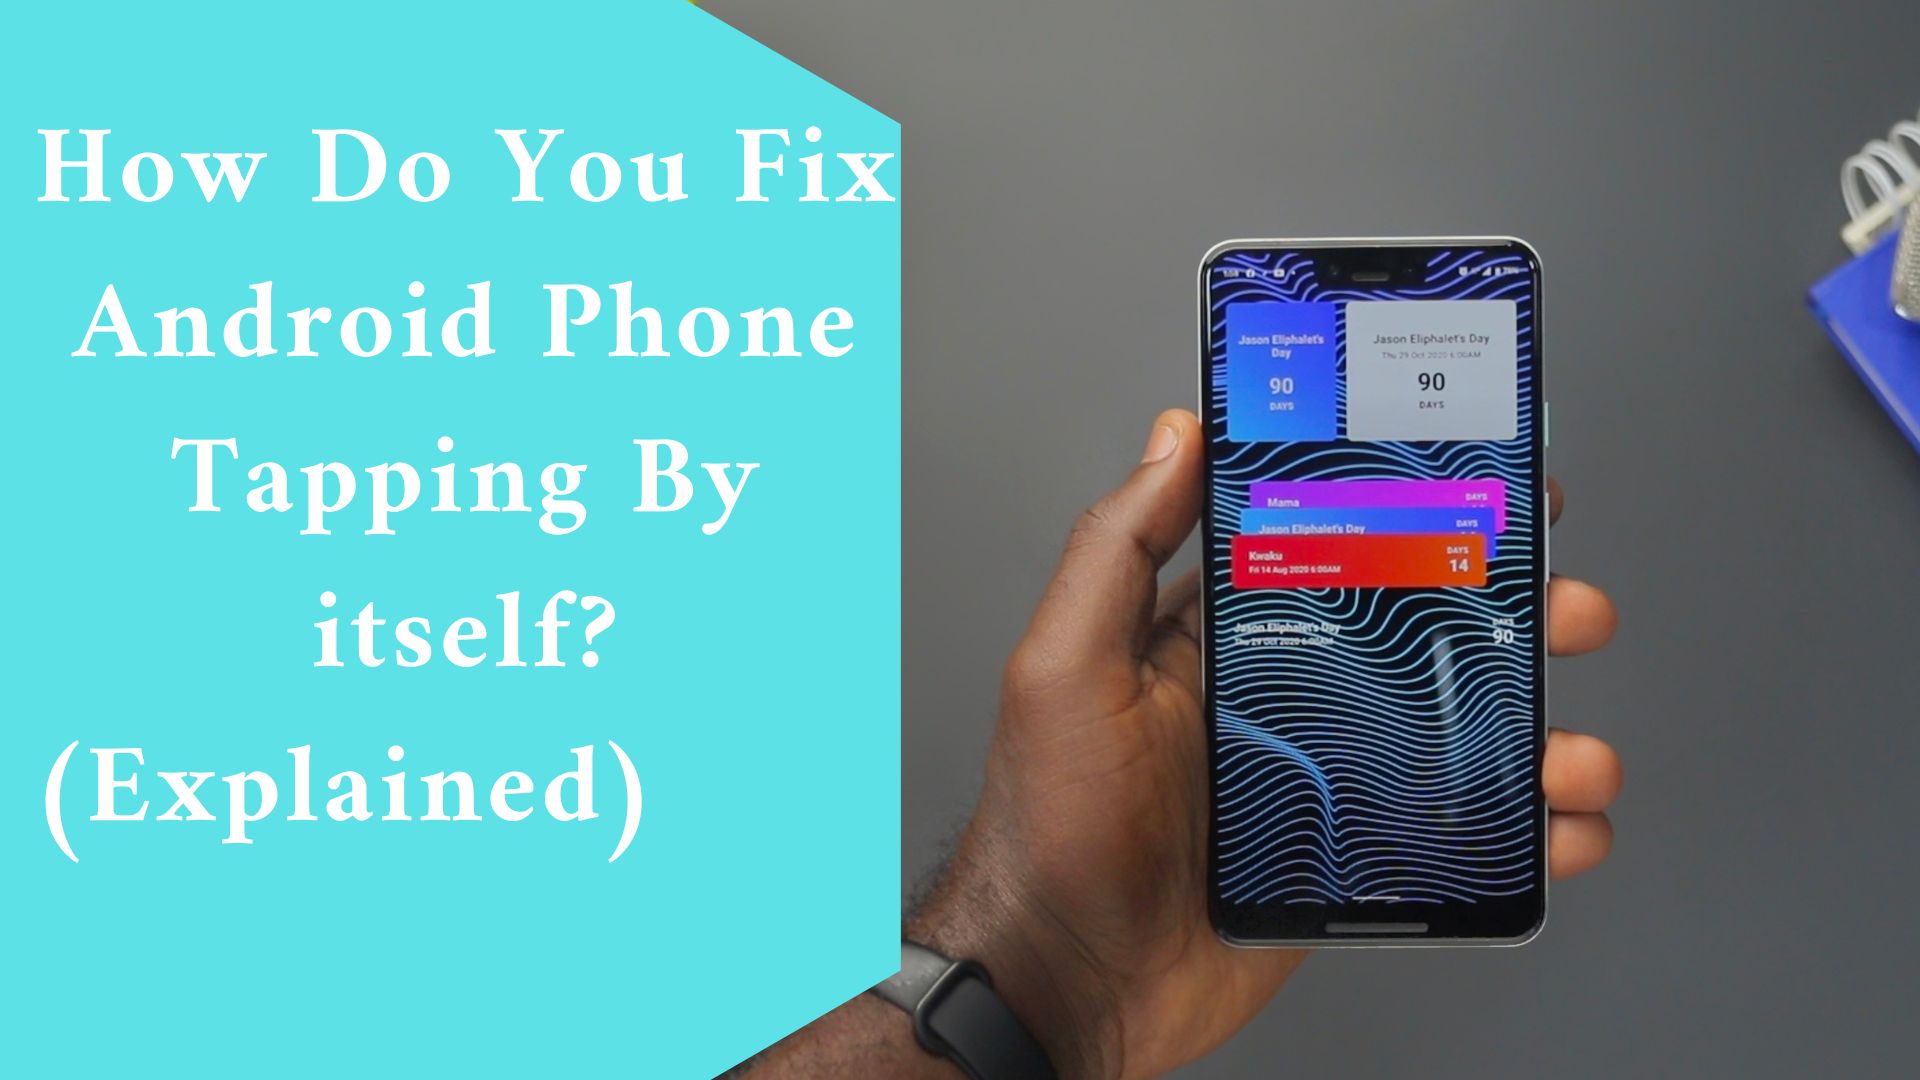 How Do You Fix Android Phone Tapping By itself?(Explained)